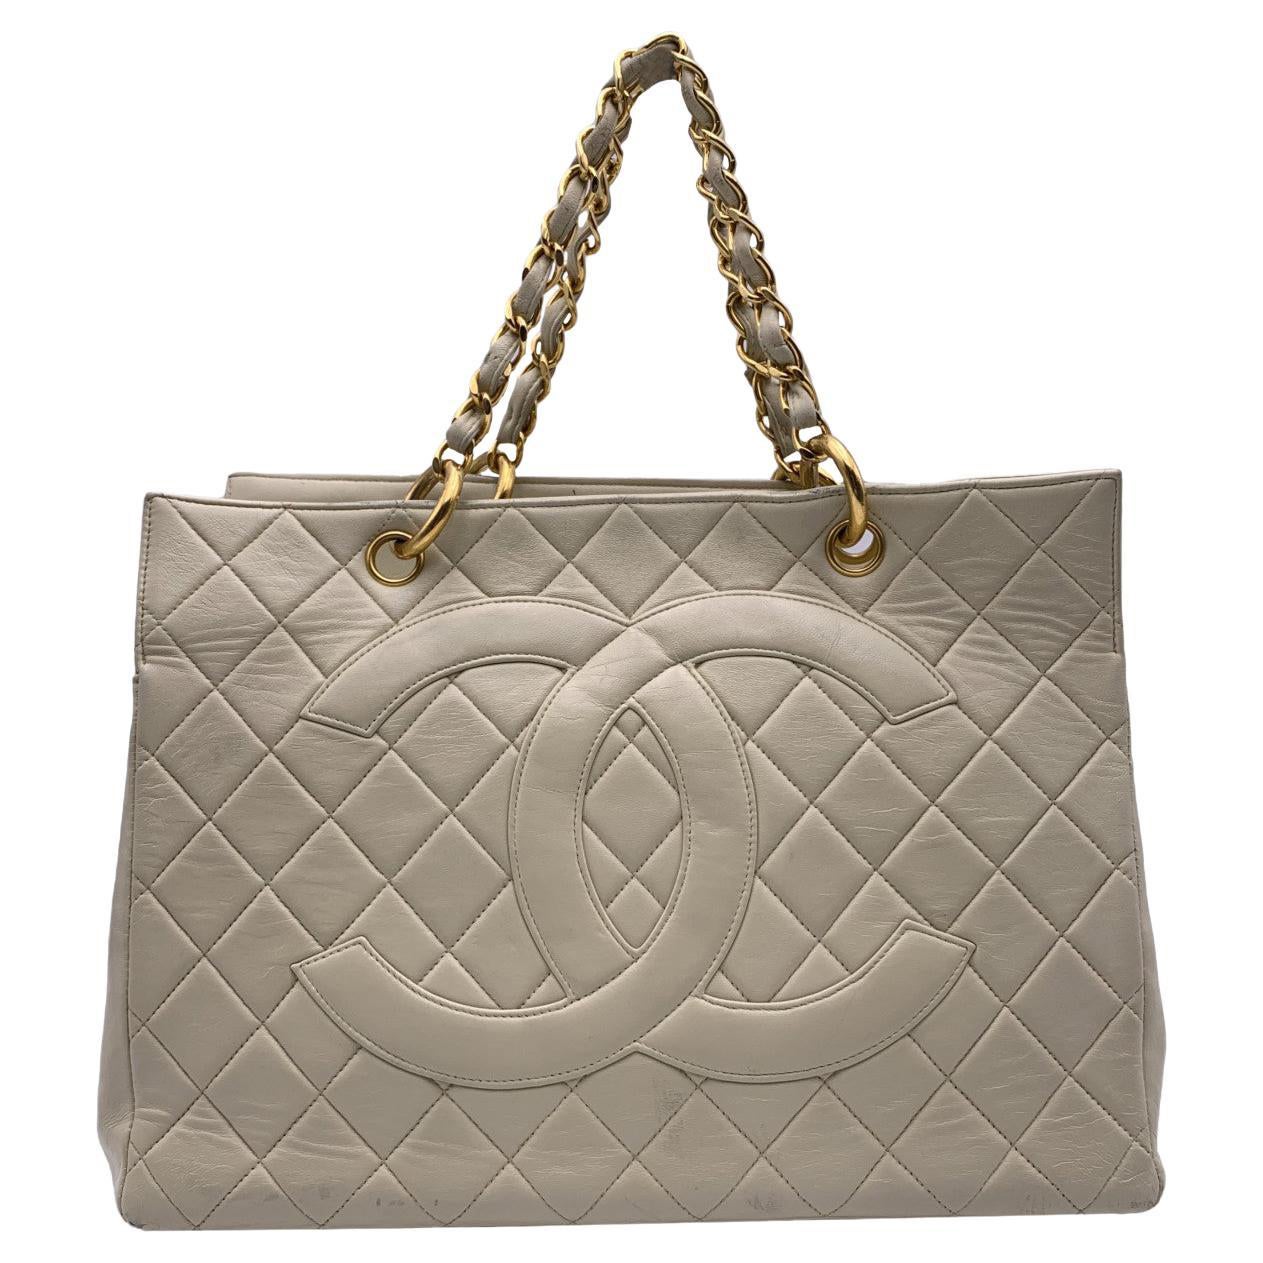 Chanel Vintage Beige Quilted Leather GST 1997 Grand Shopping Tote For Sale